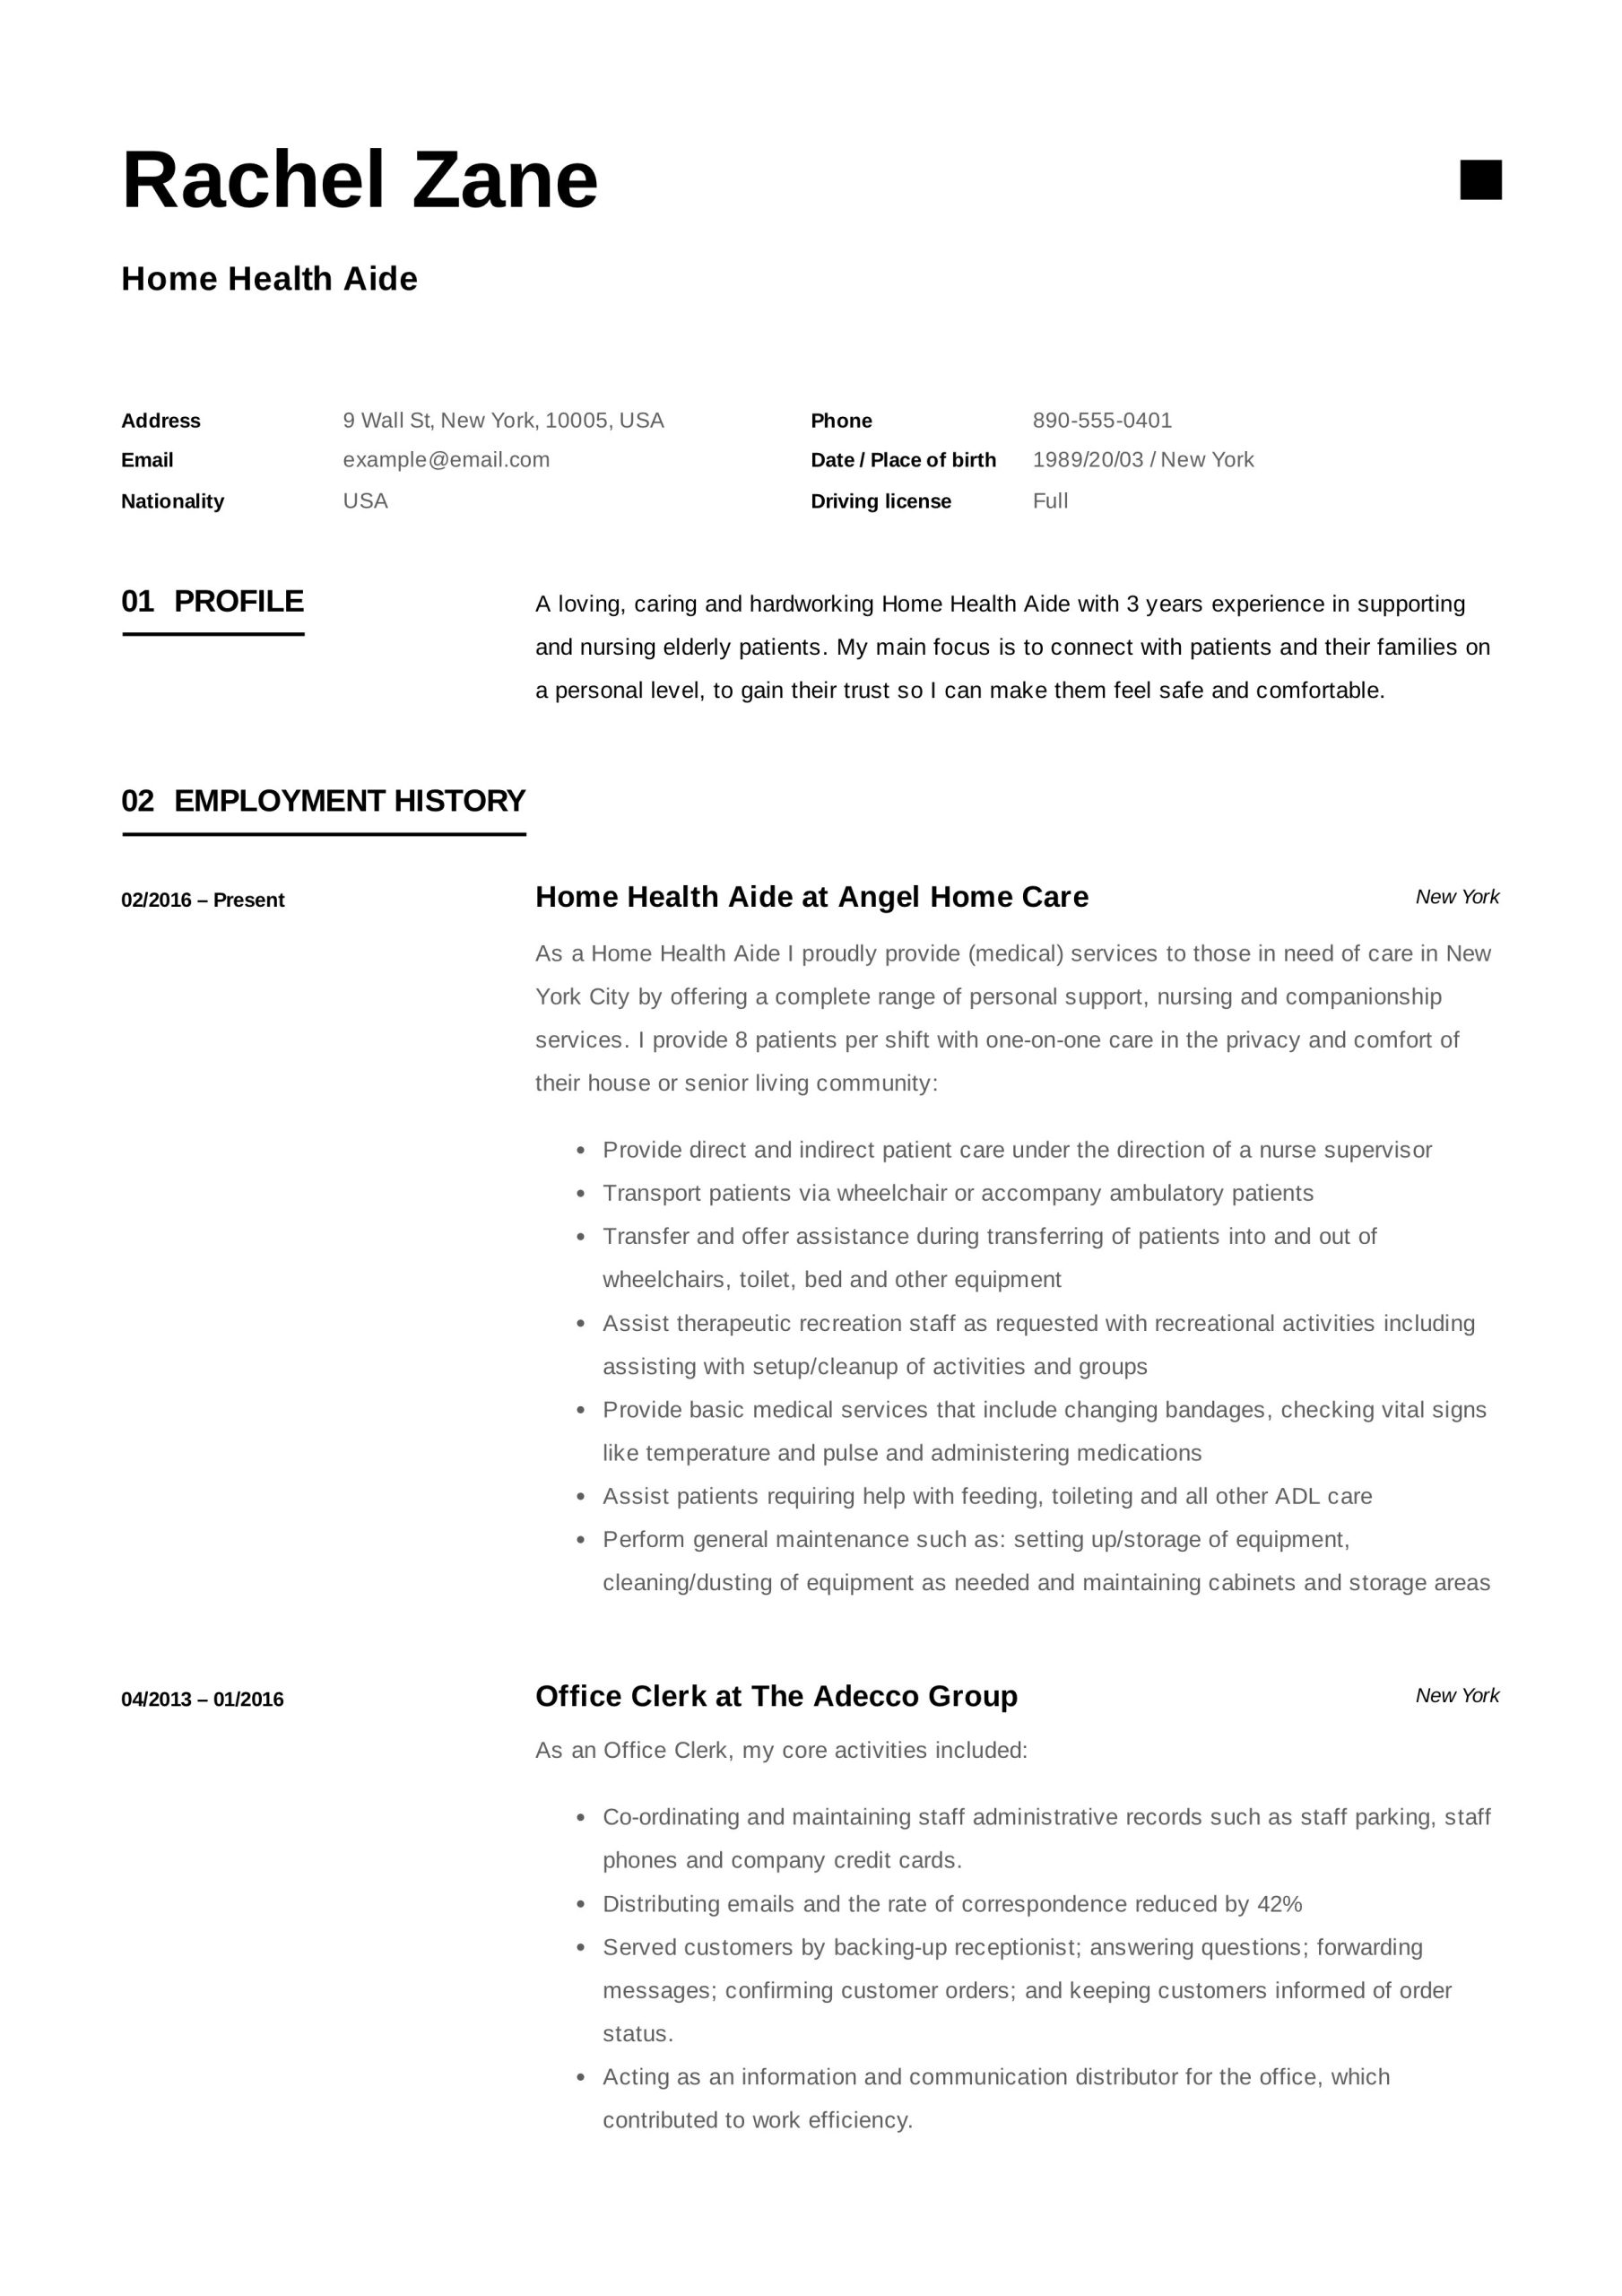 Samples Of Home Health Aide Resumes Home Health Aide Resume Guide 12 Examples Pdf